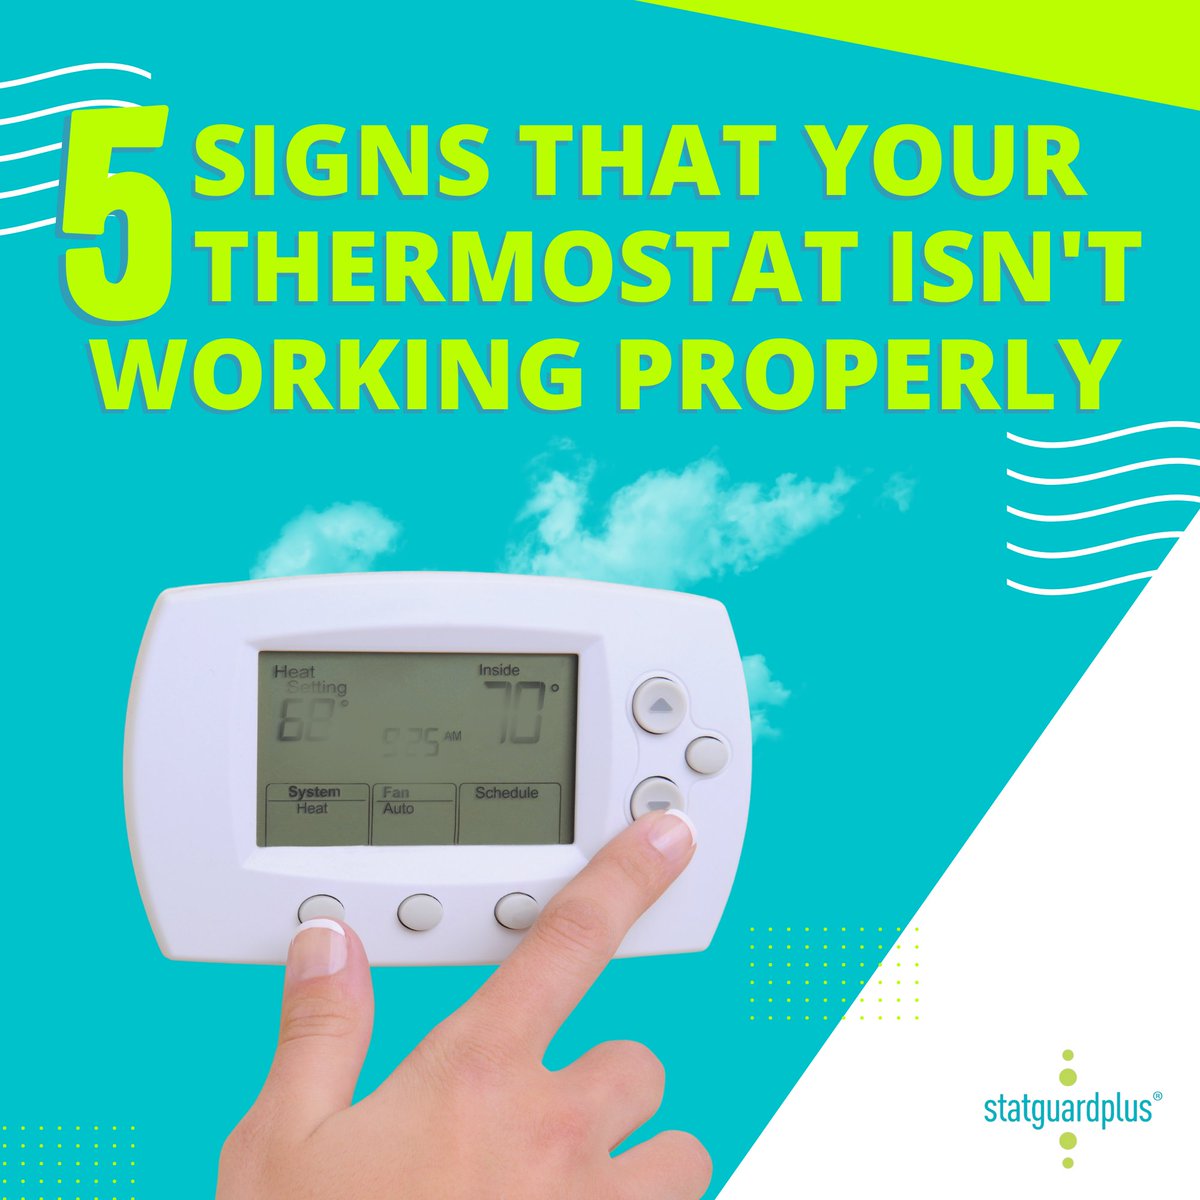 An easy way to see whether your thermostat is functioning correctly or not is by looking if the equipment is presenting one or more of these 5 signs:

[Read more in the thread]

#ThermostatCover #ThermostatTips #Thermostats #HVACTips #SmallBusiness #RetailStore #SmallBiz